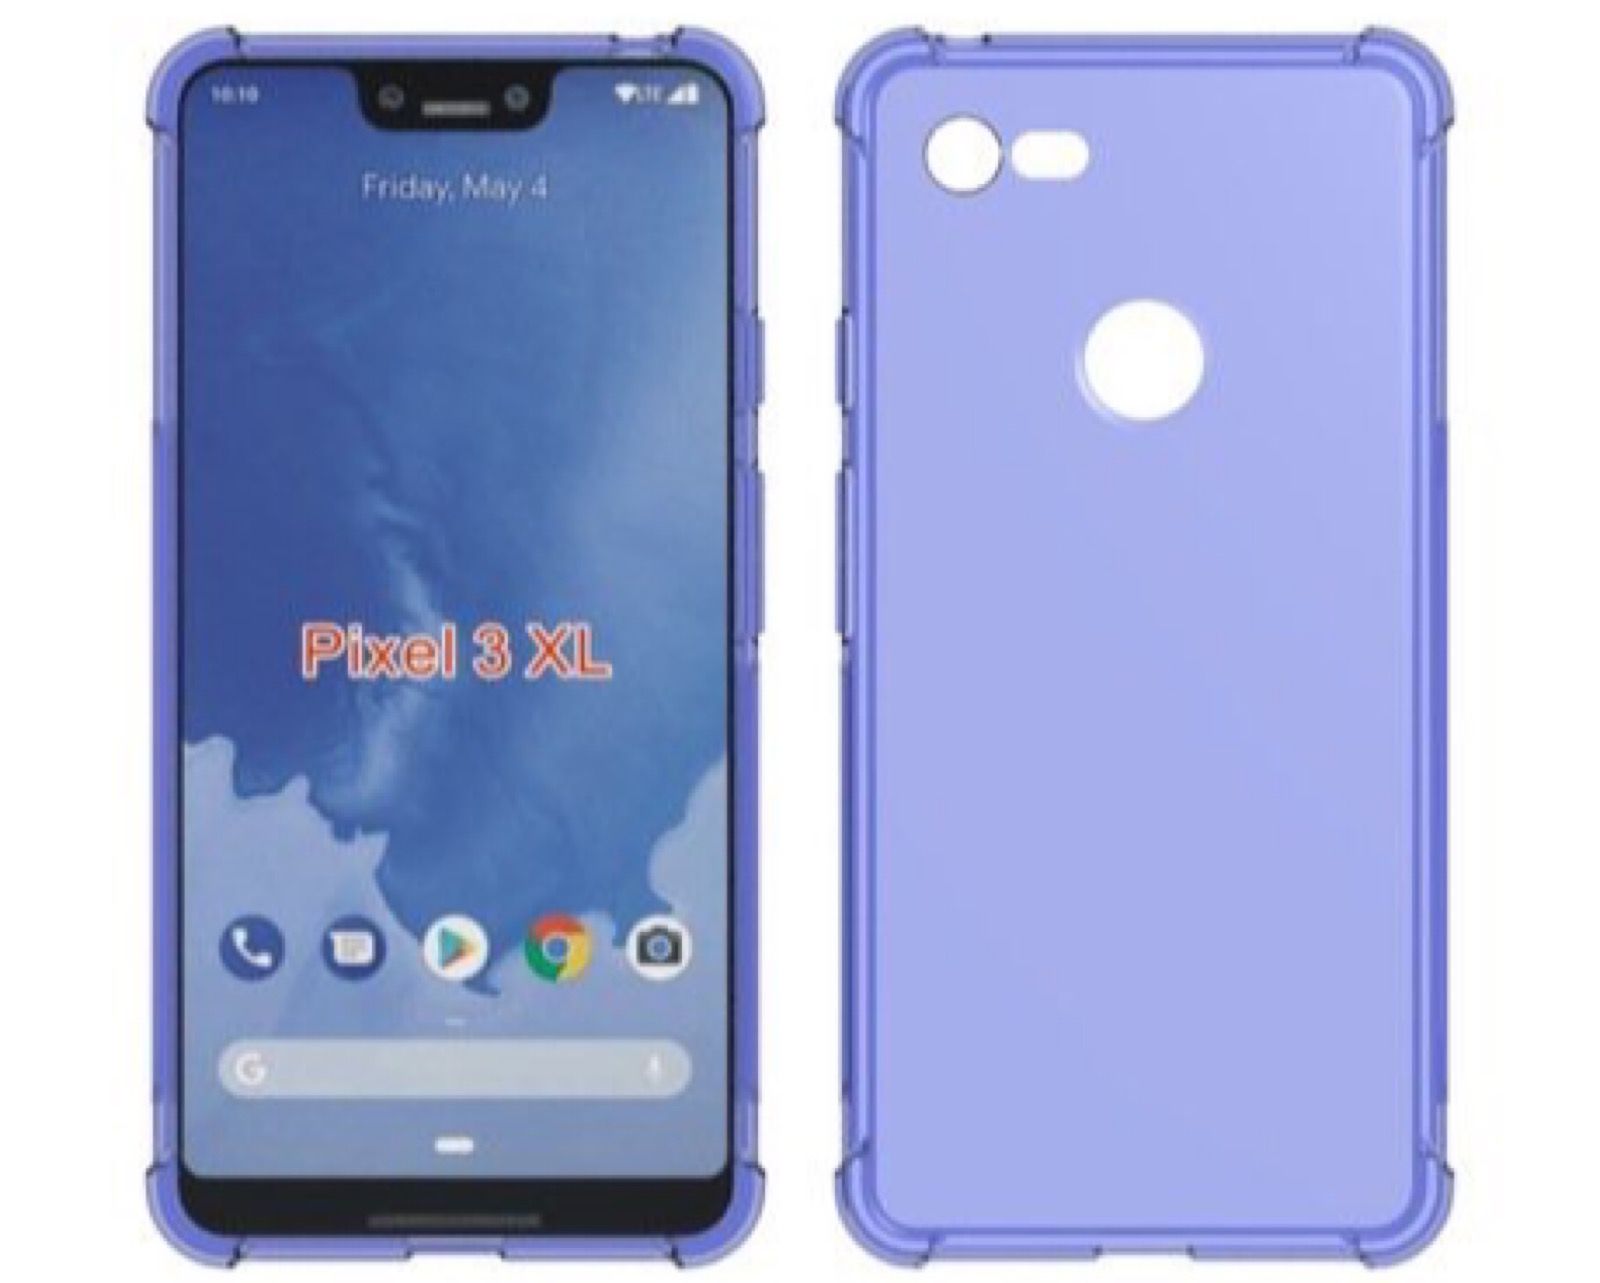 Google Pixel 3 all but confirmed to keep single lens camera image 2